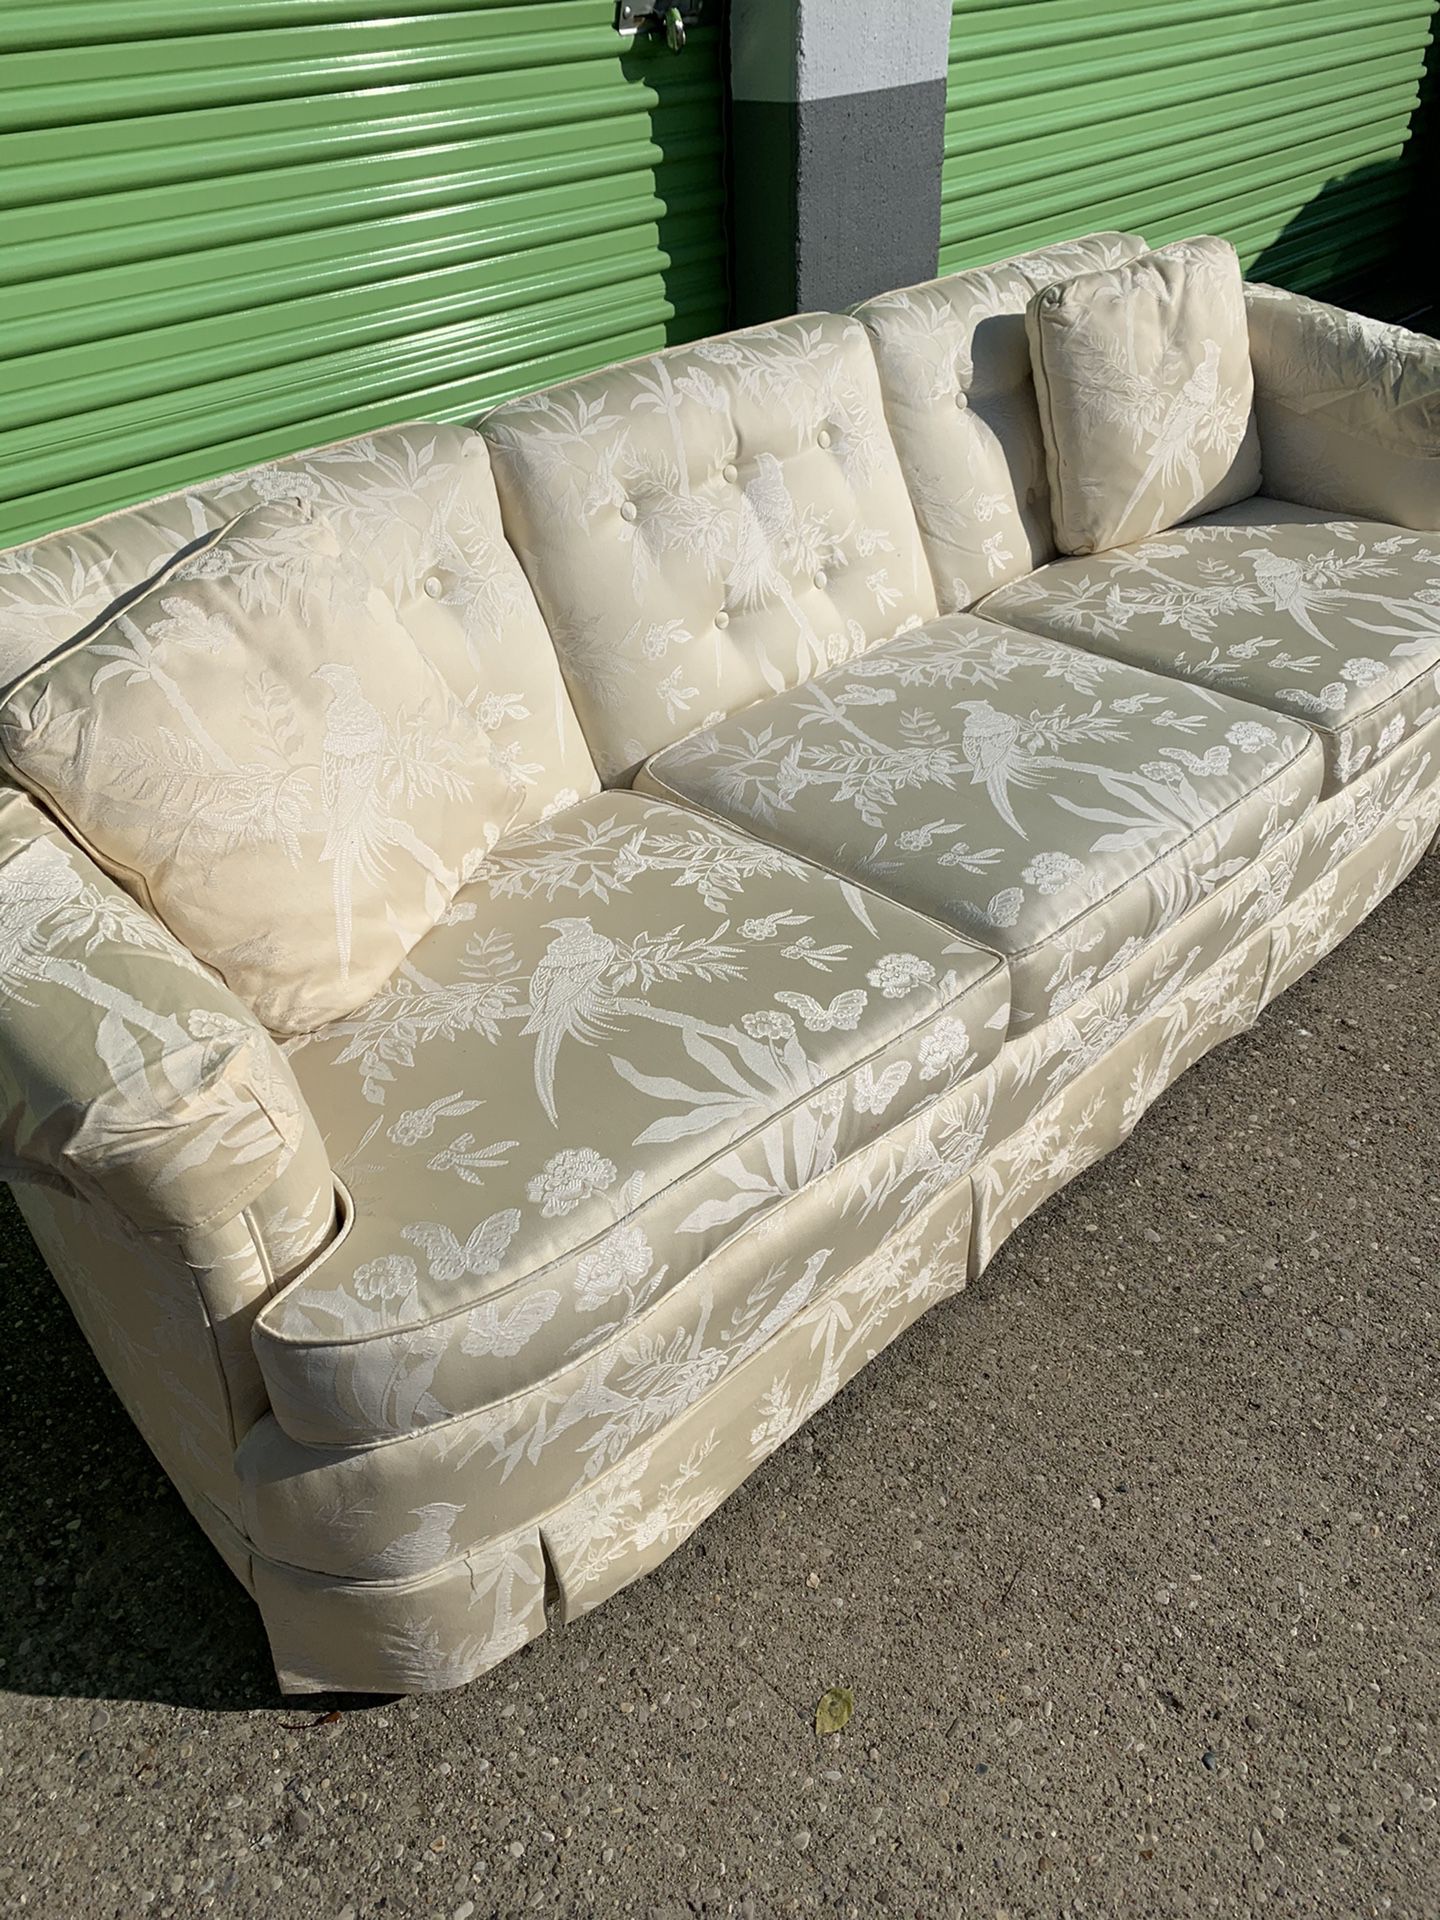 Cream colored bird pattern couch. Pick up in Florence KY